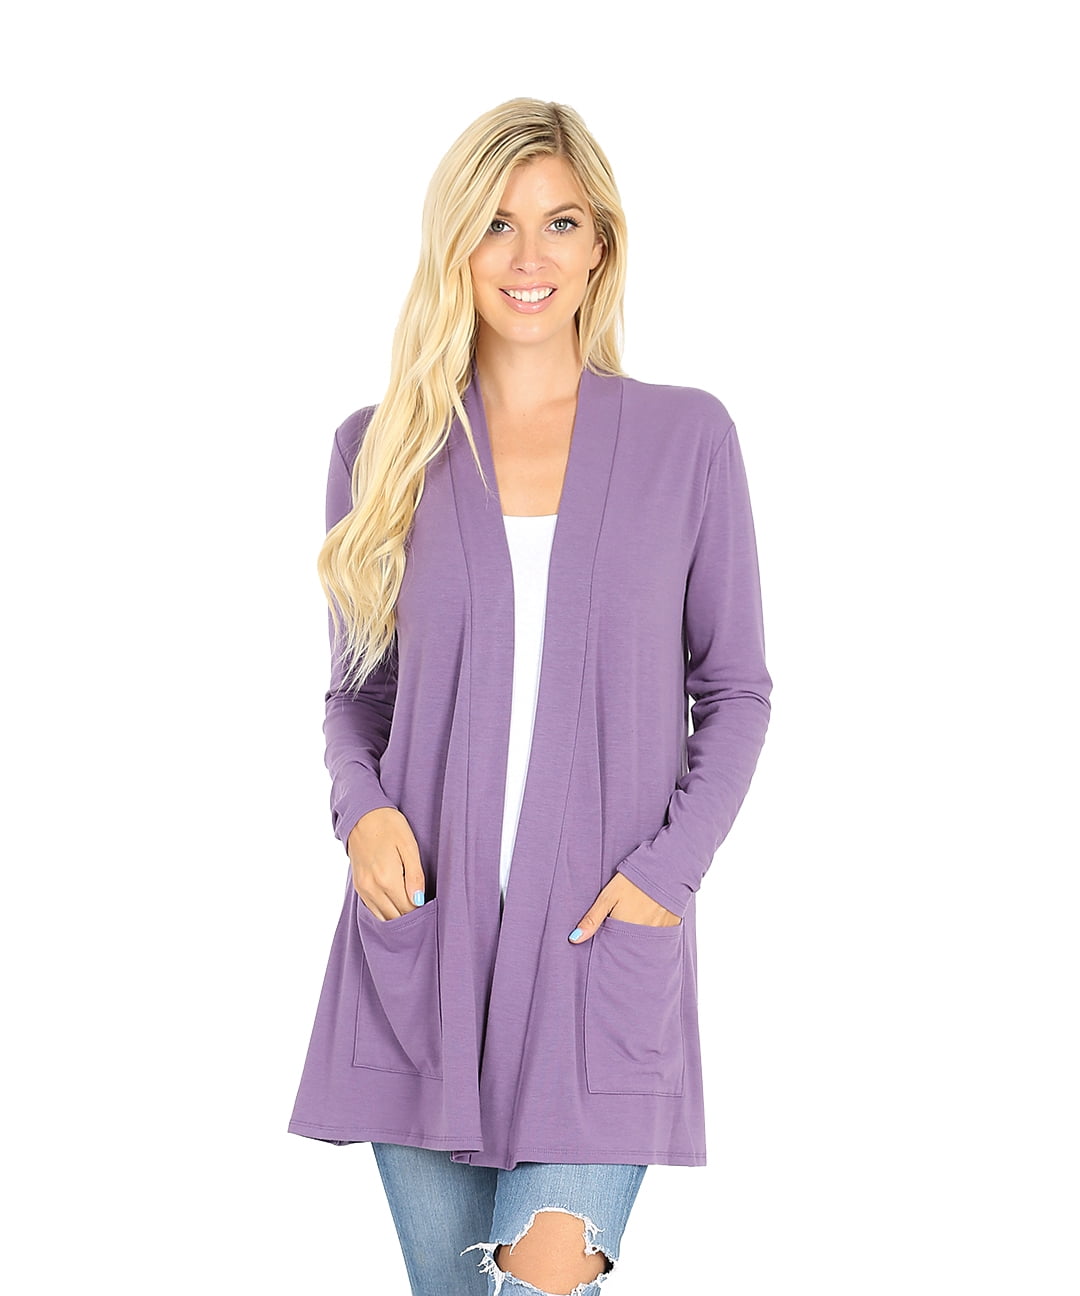 Women's Open Front Cardigan with Front Pockets - Walmart.com